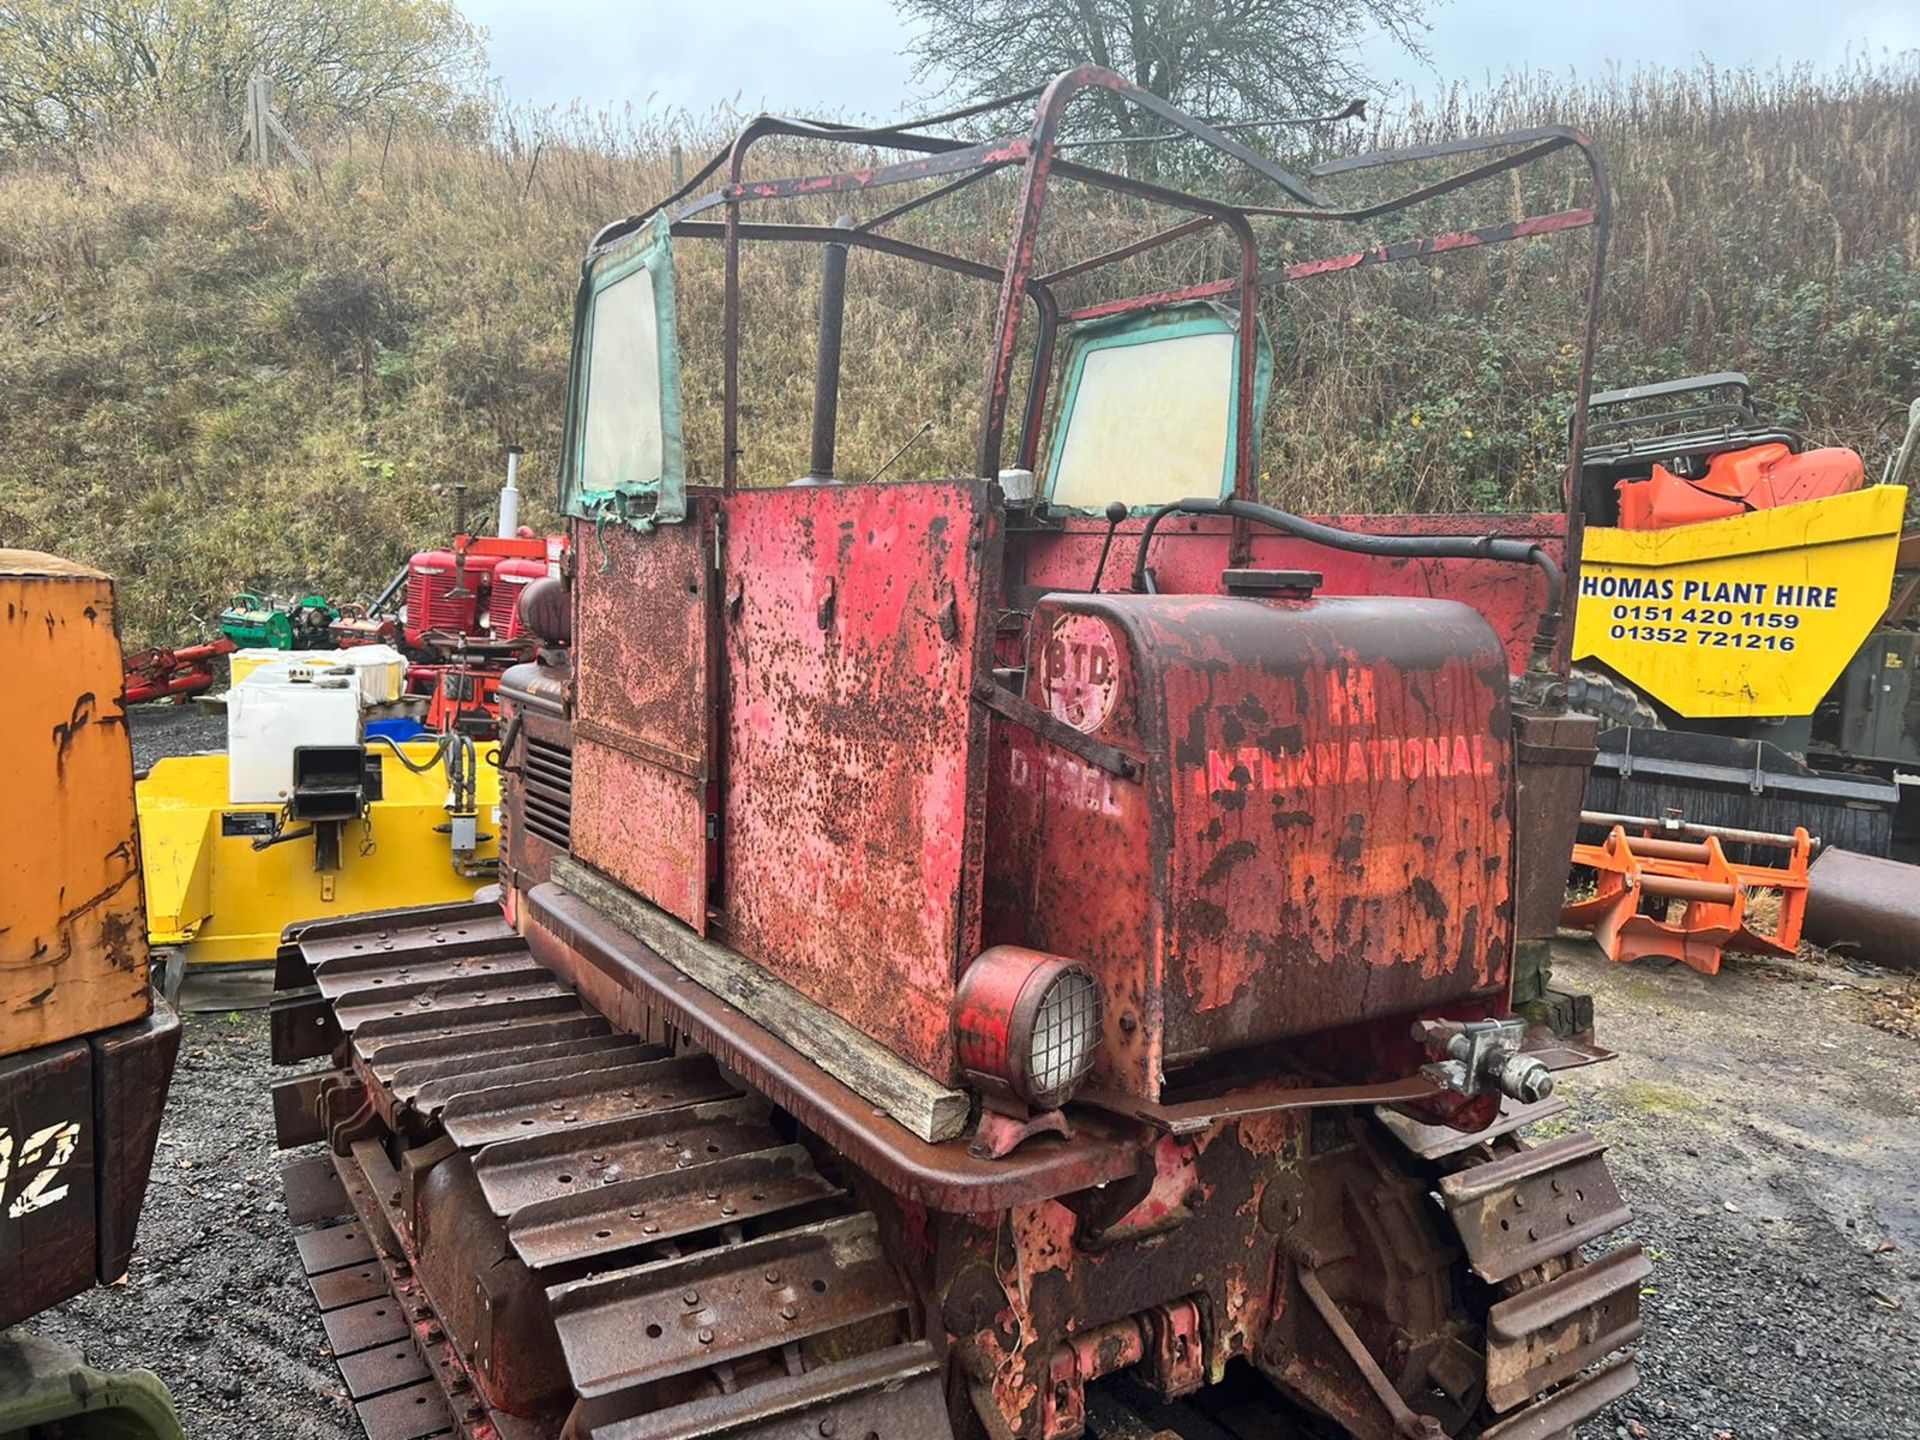 1955 INTERNATIONAL BTD6 39hp DIESEL TRACKED CRAWLER TRACTOR, RUNS AND DRIVES *PLUS VAT* - Image 3 of 10